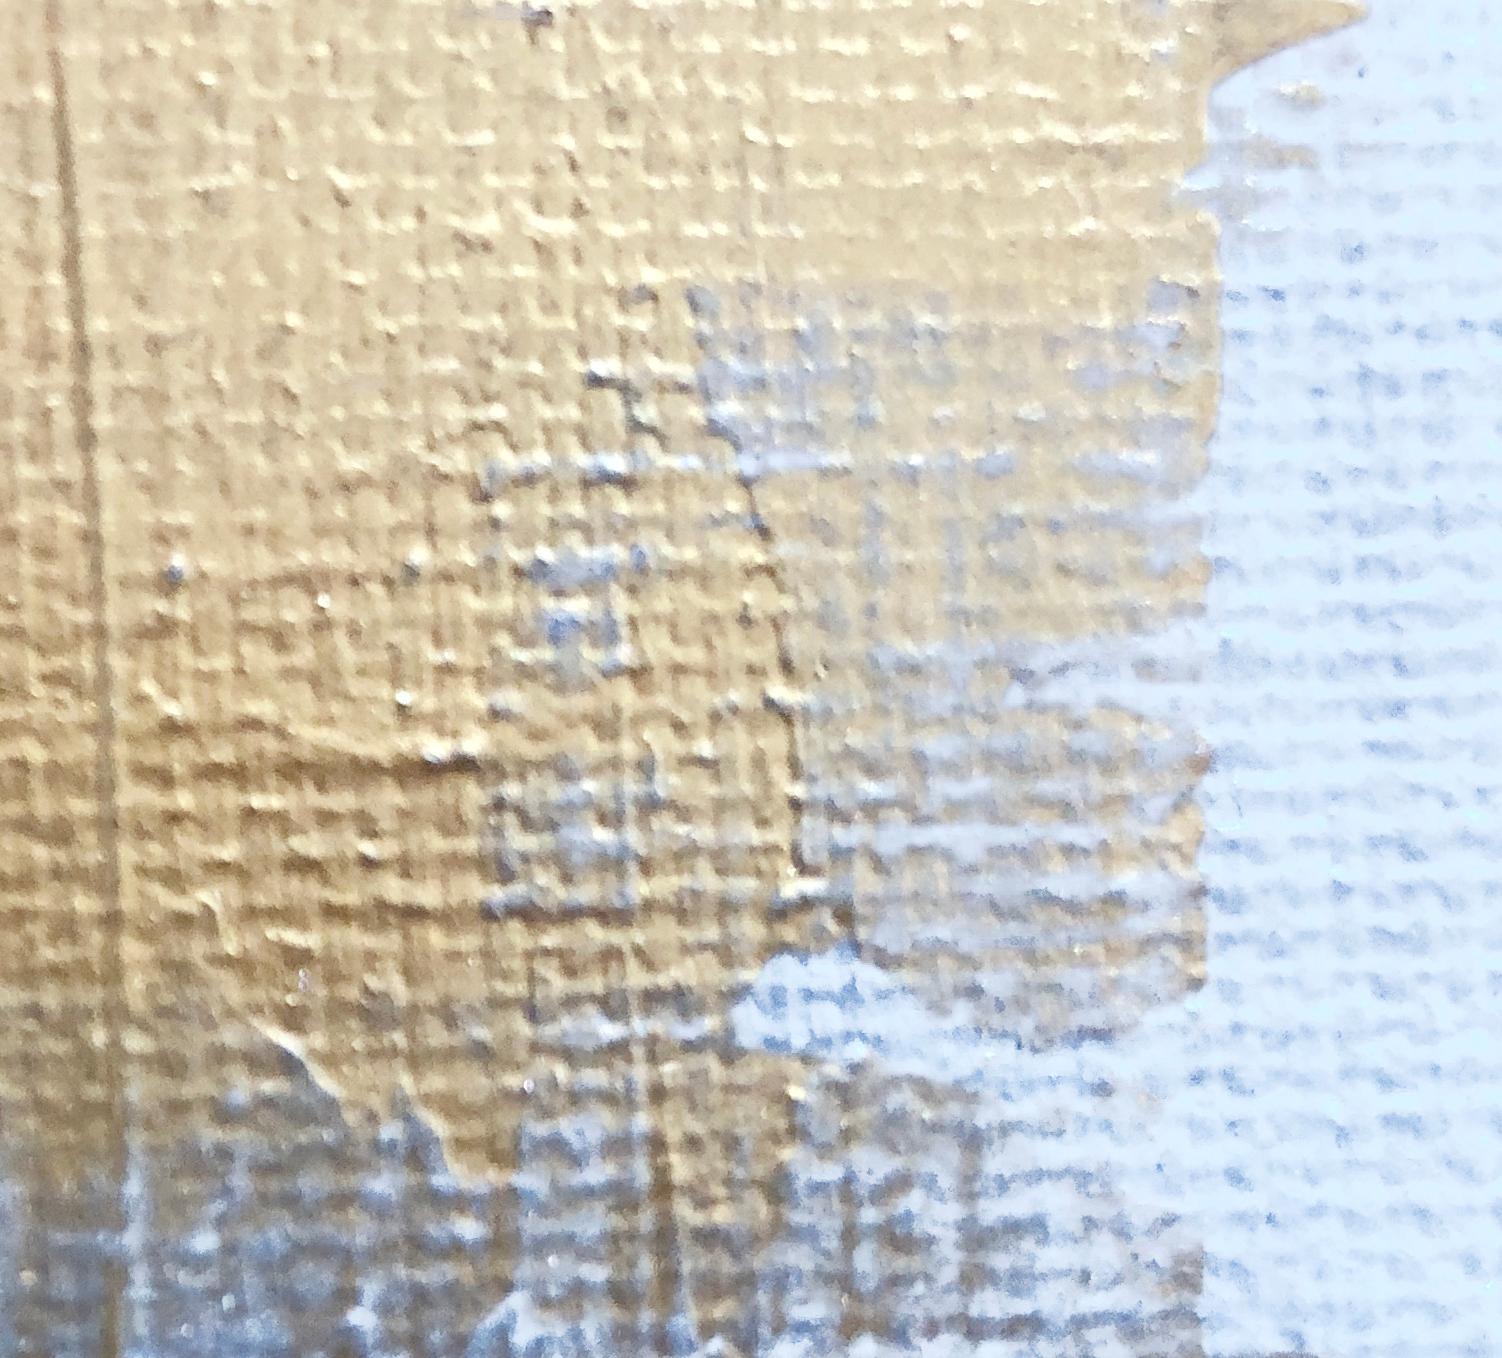 Gold Silver Painting, Golden Aura, One of a Kind Hand Textured Giclee on Canvas

State-of-the-art HAND EMBELLISHED ∽ MUSEUM QUALITY ∽ DISPLAY READY Giclee Reproduction
Each limited edition Giclee is hand embellished and textured  by the artist,